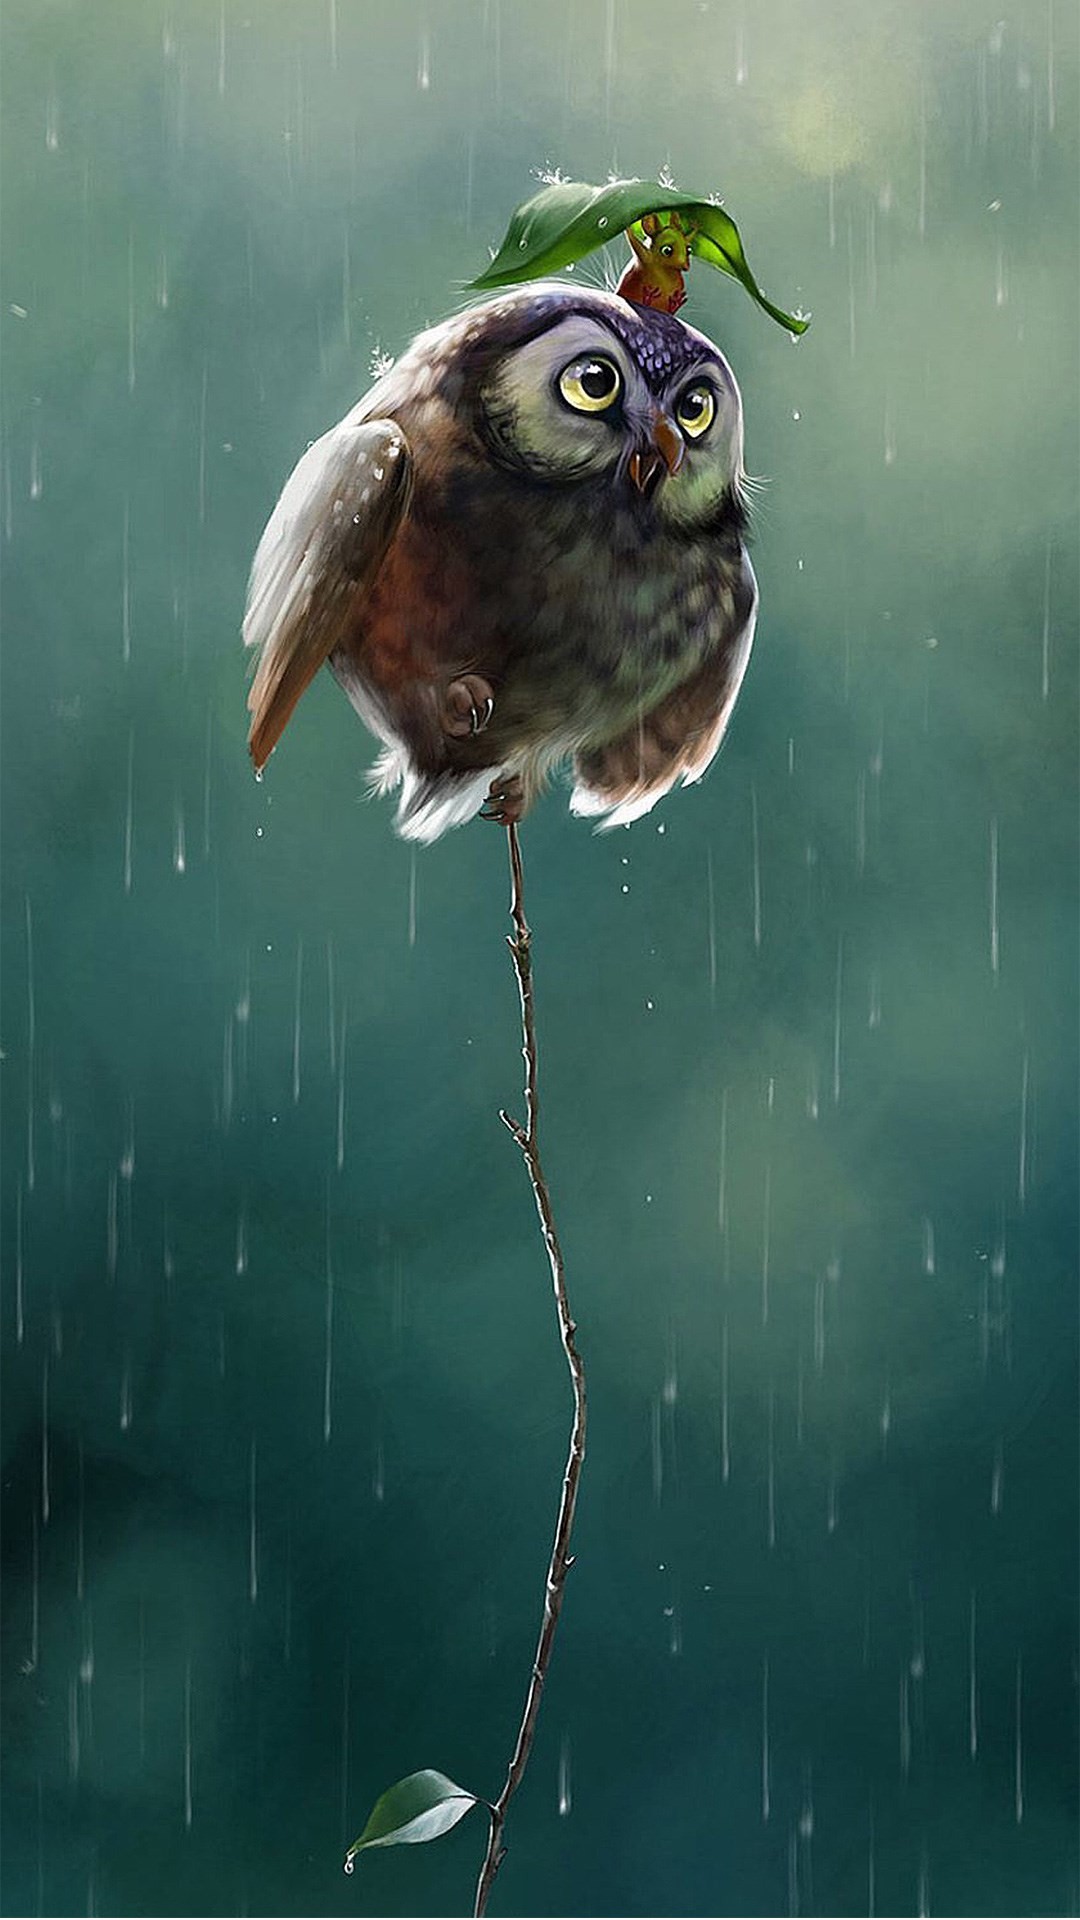 1080x1920 Cute Owl Flying High Rainy Day Covering Leaf iPhone 8 wallpaper